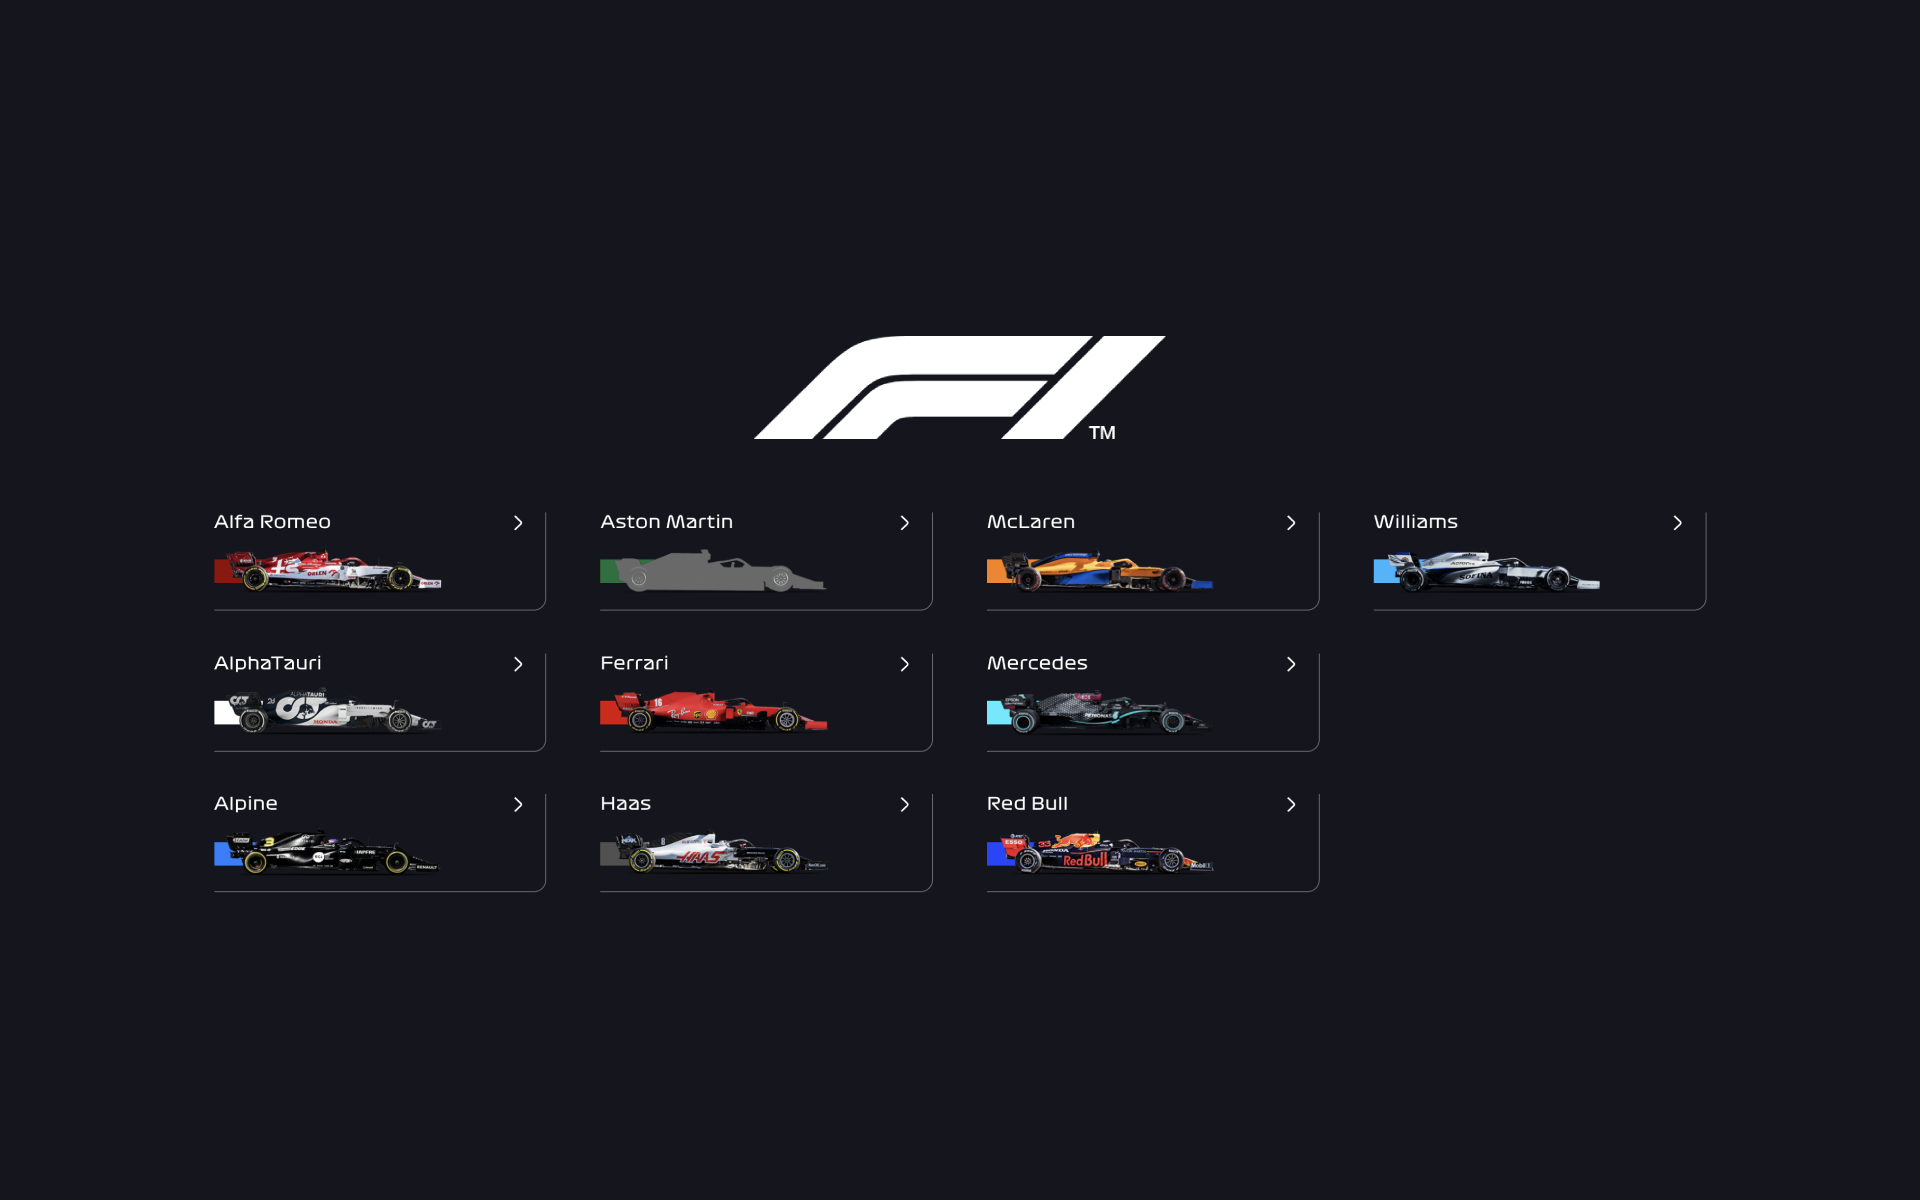 Who will drive with whom in the 2021 Formula 1 season?